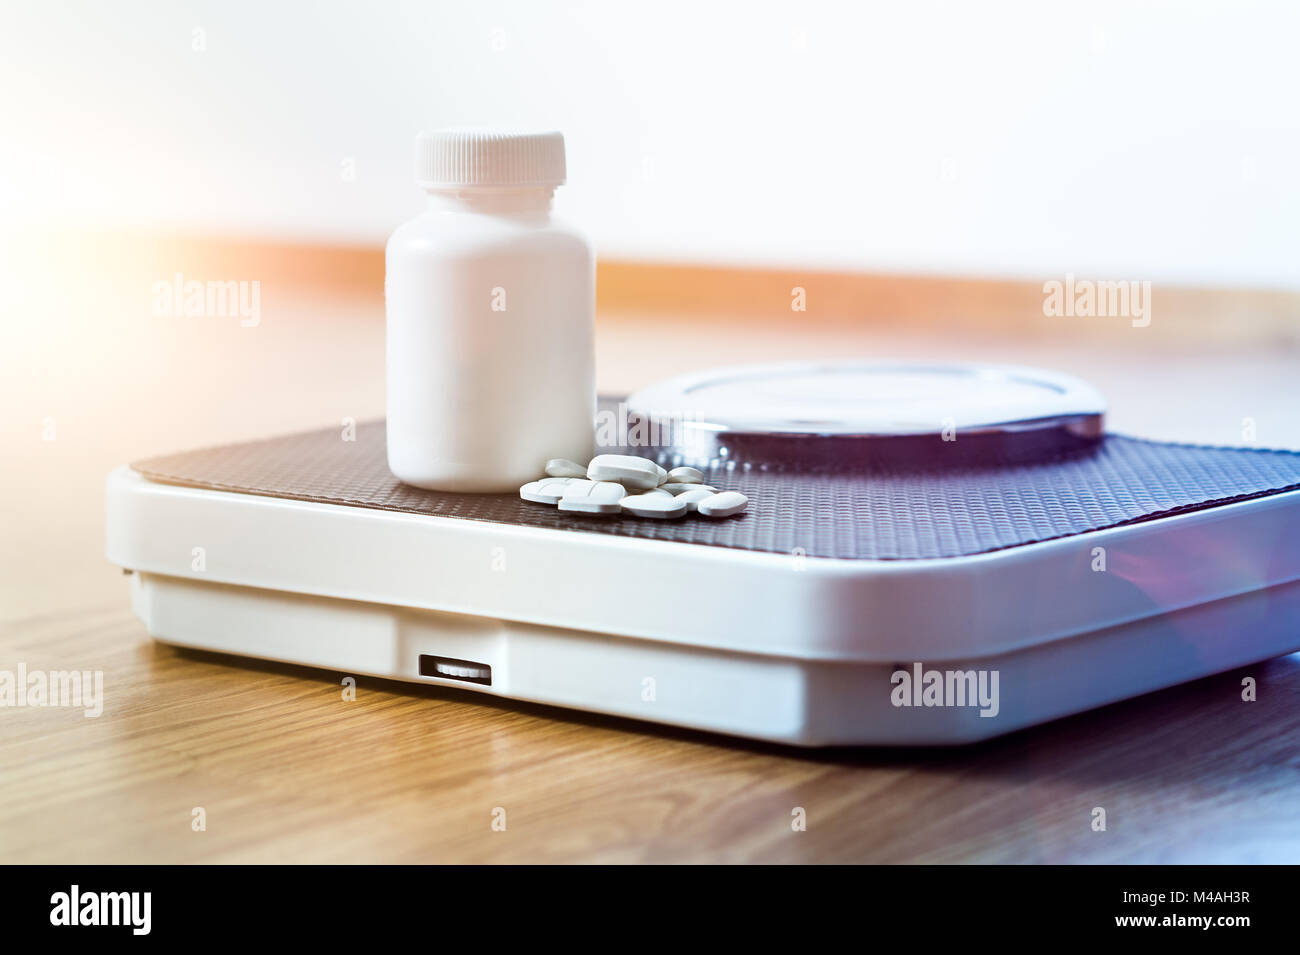 Diet pills on a scale. Weight loss medicine spilled out from bottle. Stock Photo